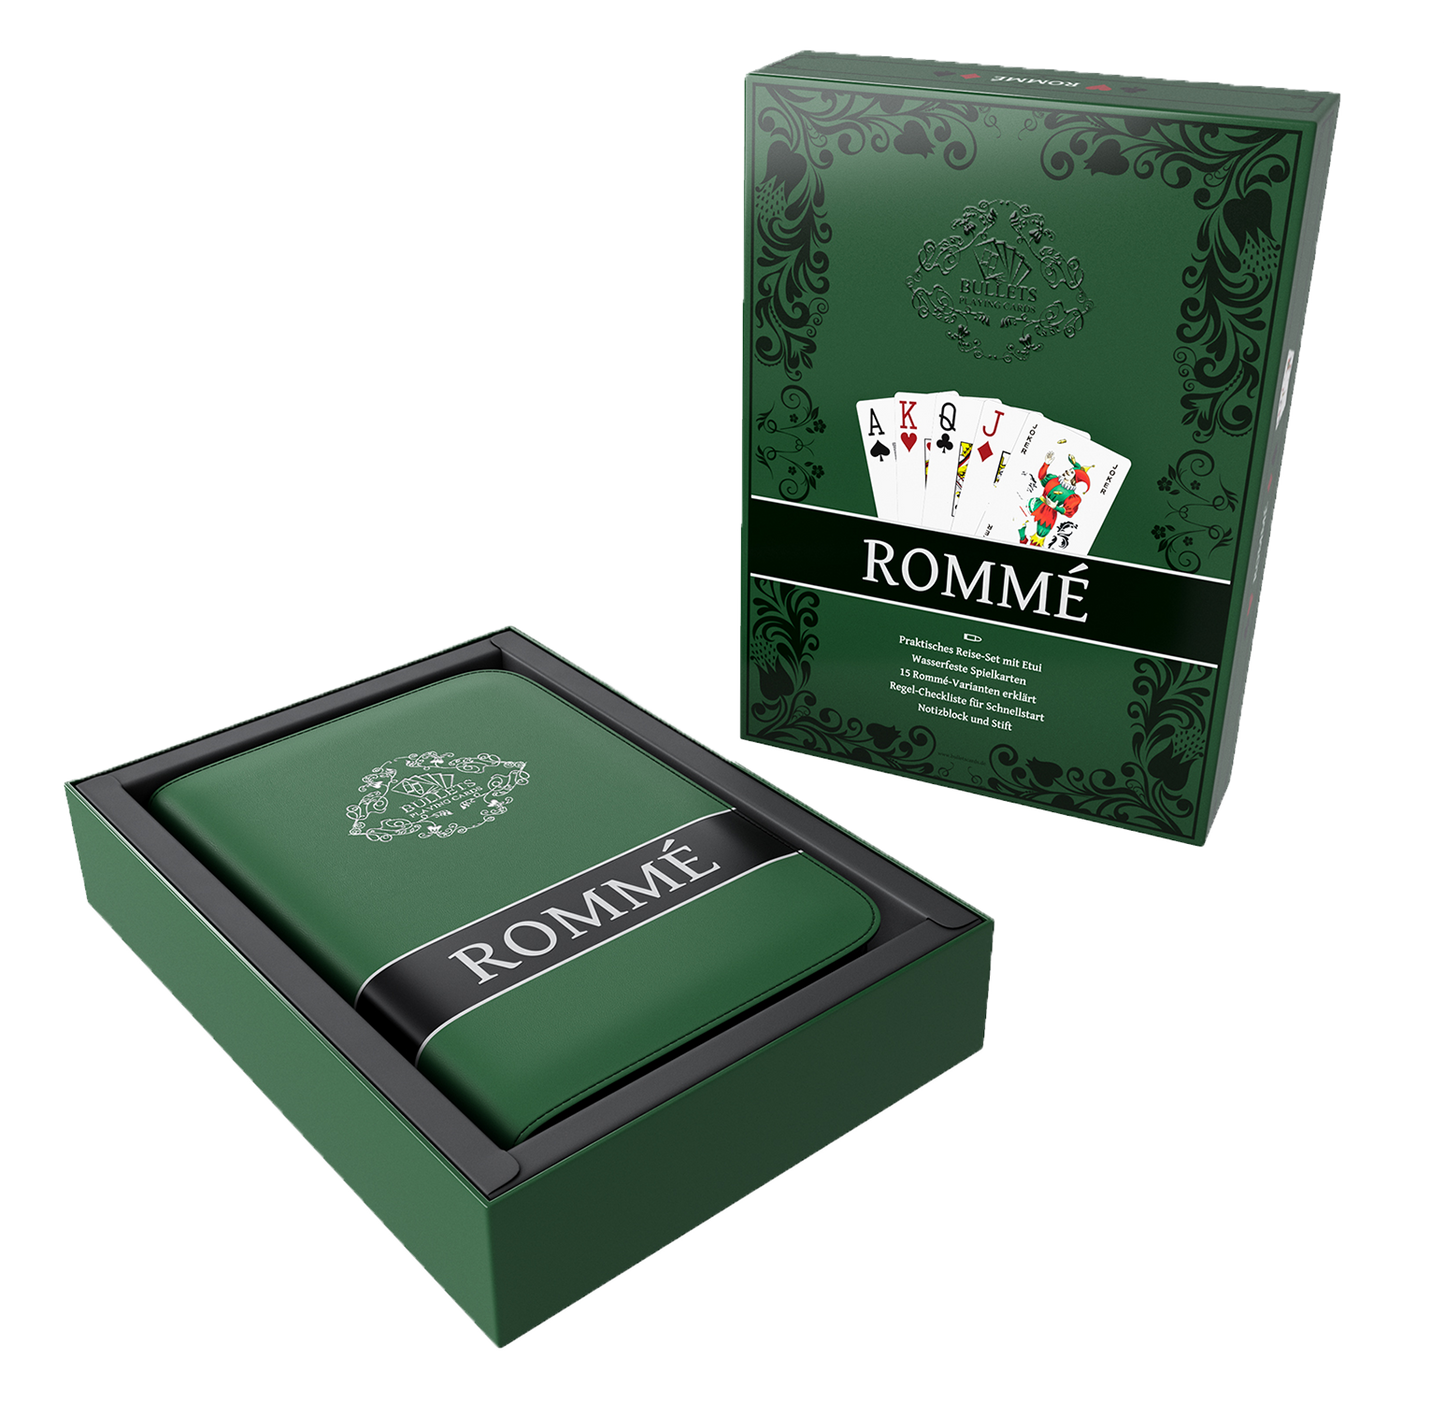 Rummy set in artificial leather case, including plastic playing cards, rules of the game with 15 Rummy variants, short rules, pen and pad